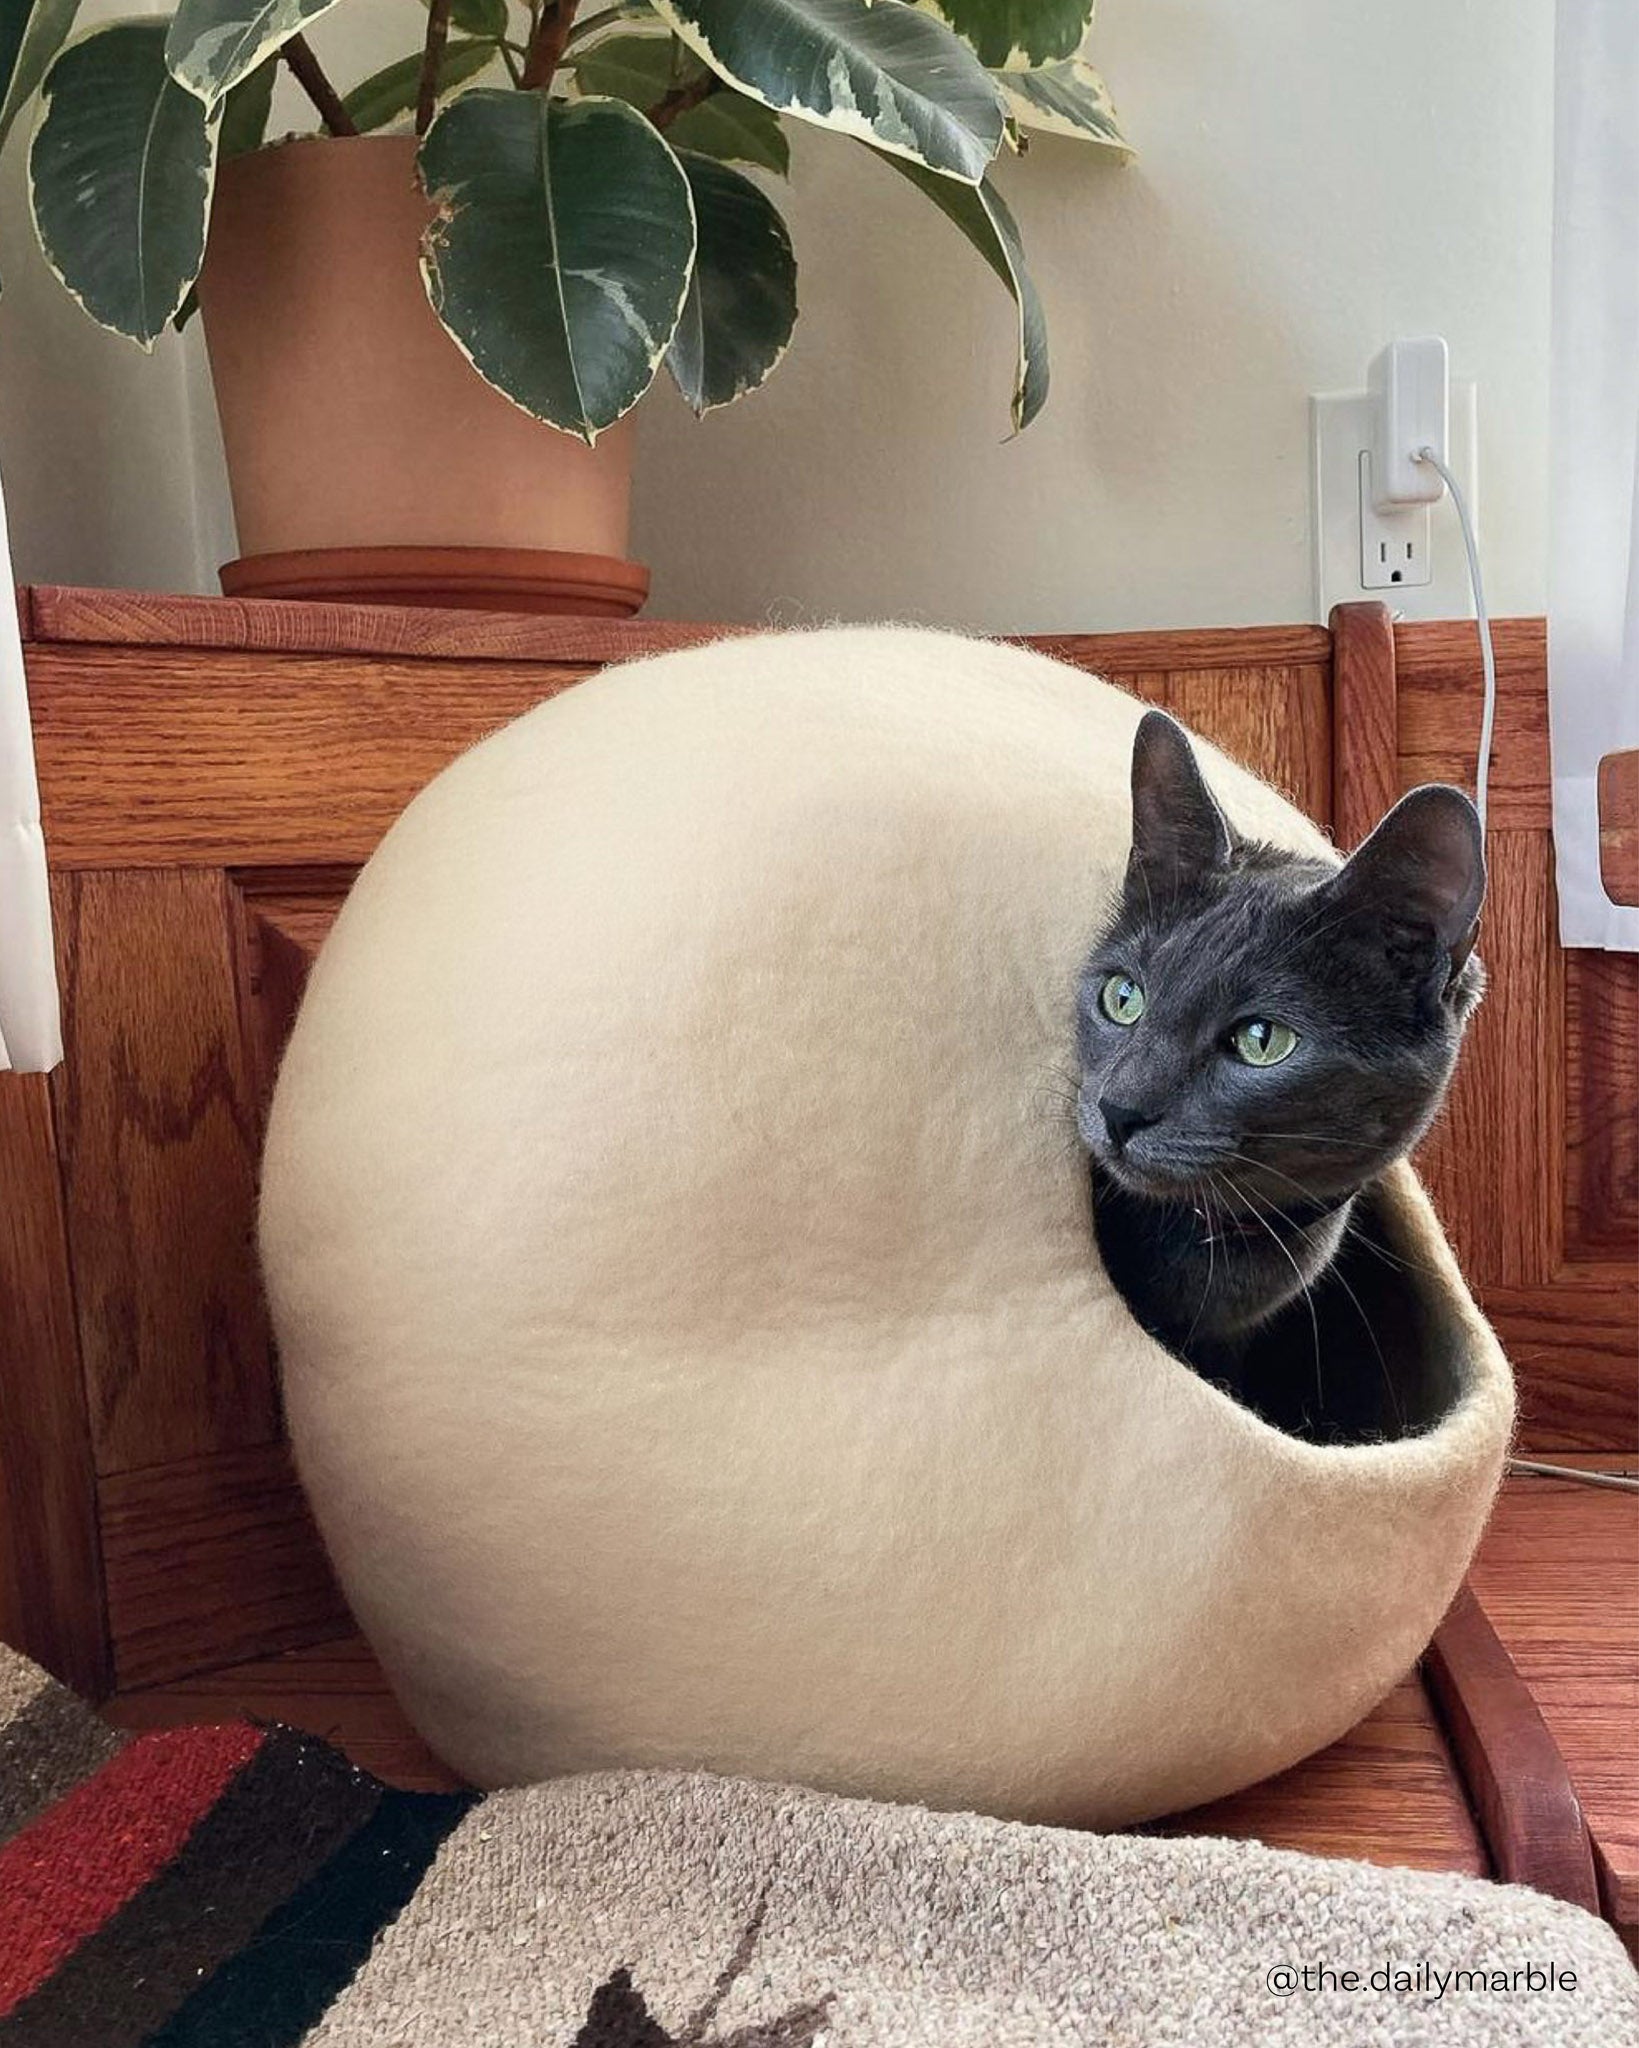 Paz Felt Cat Cave on Instagram by @the.dailymarble